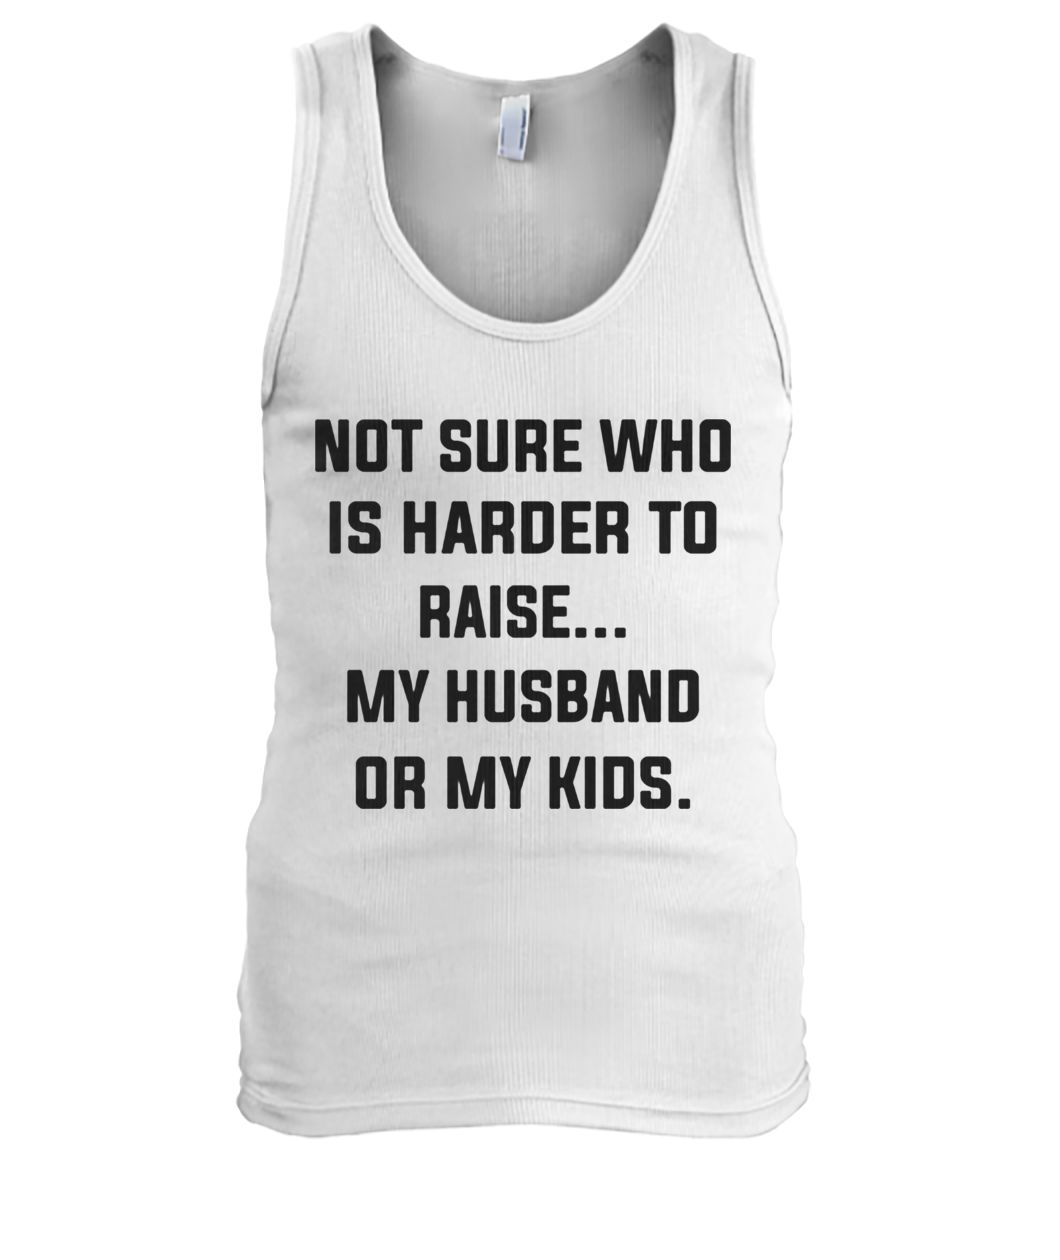 Not sure who is harder to raise my husband or my kids men's tank top